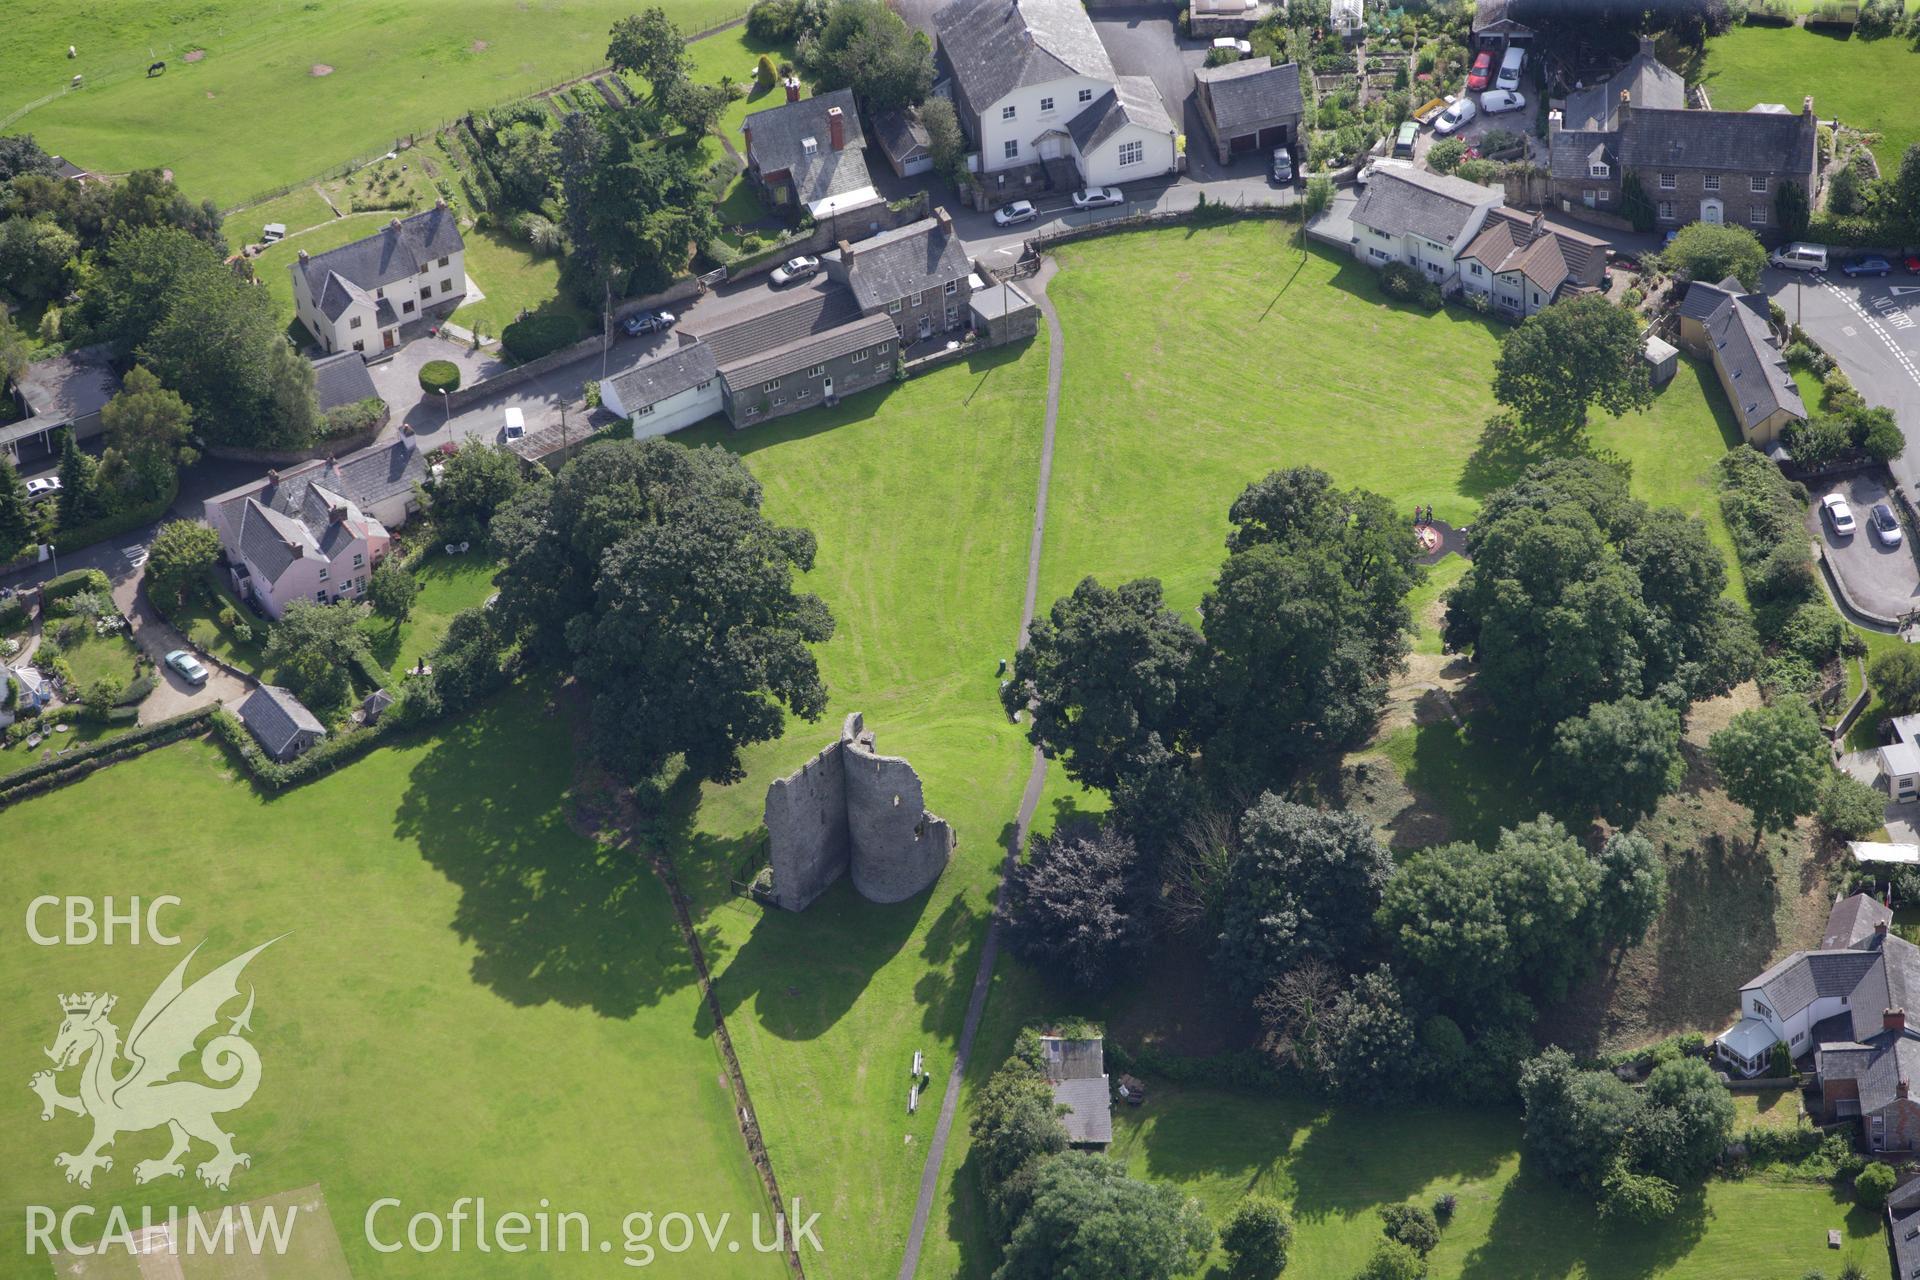 RCAHMW colour oblique aerial photograph of Crickhowell Castle. Taken on 23 July 2009 by Toby Driver